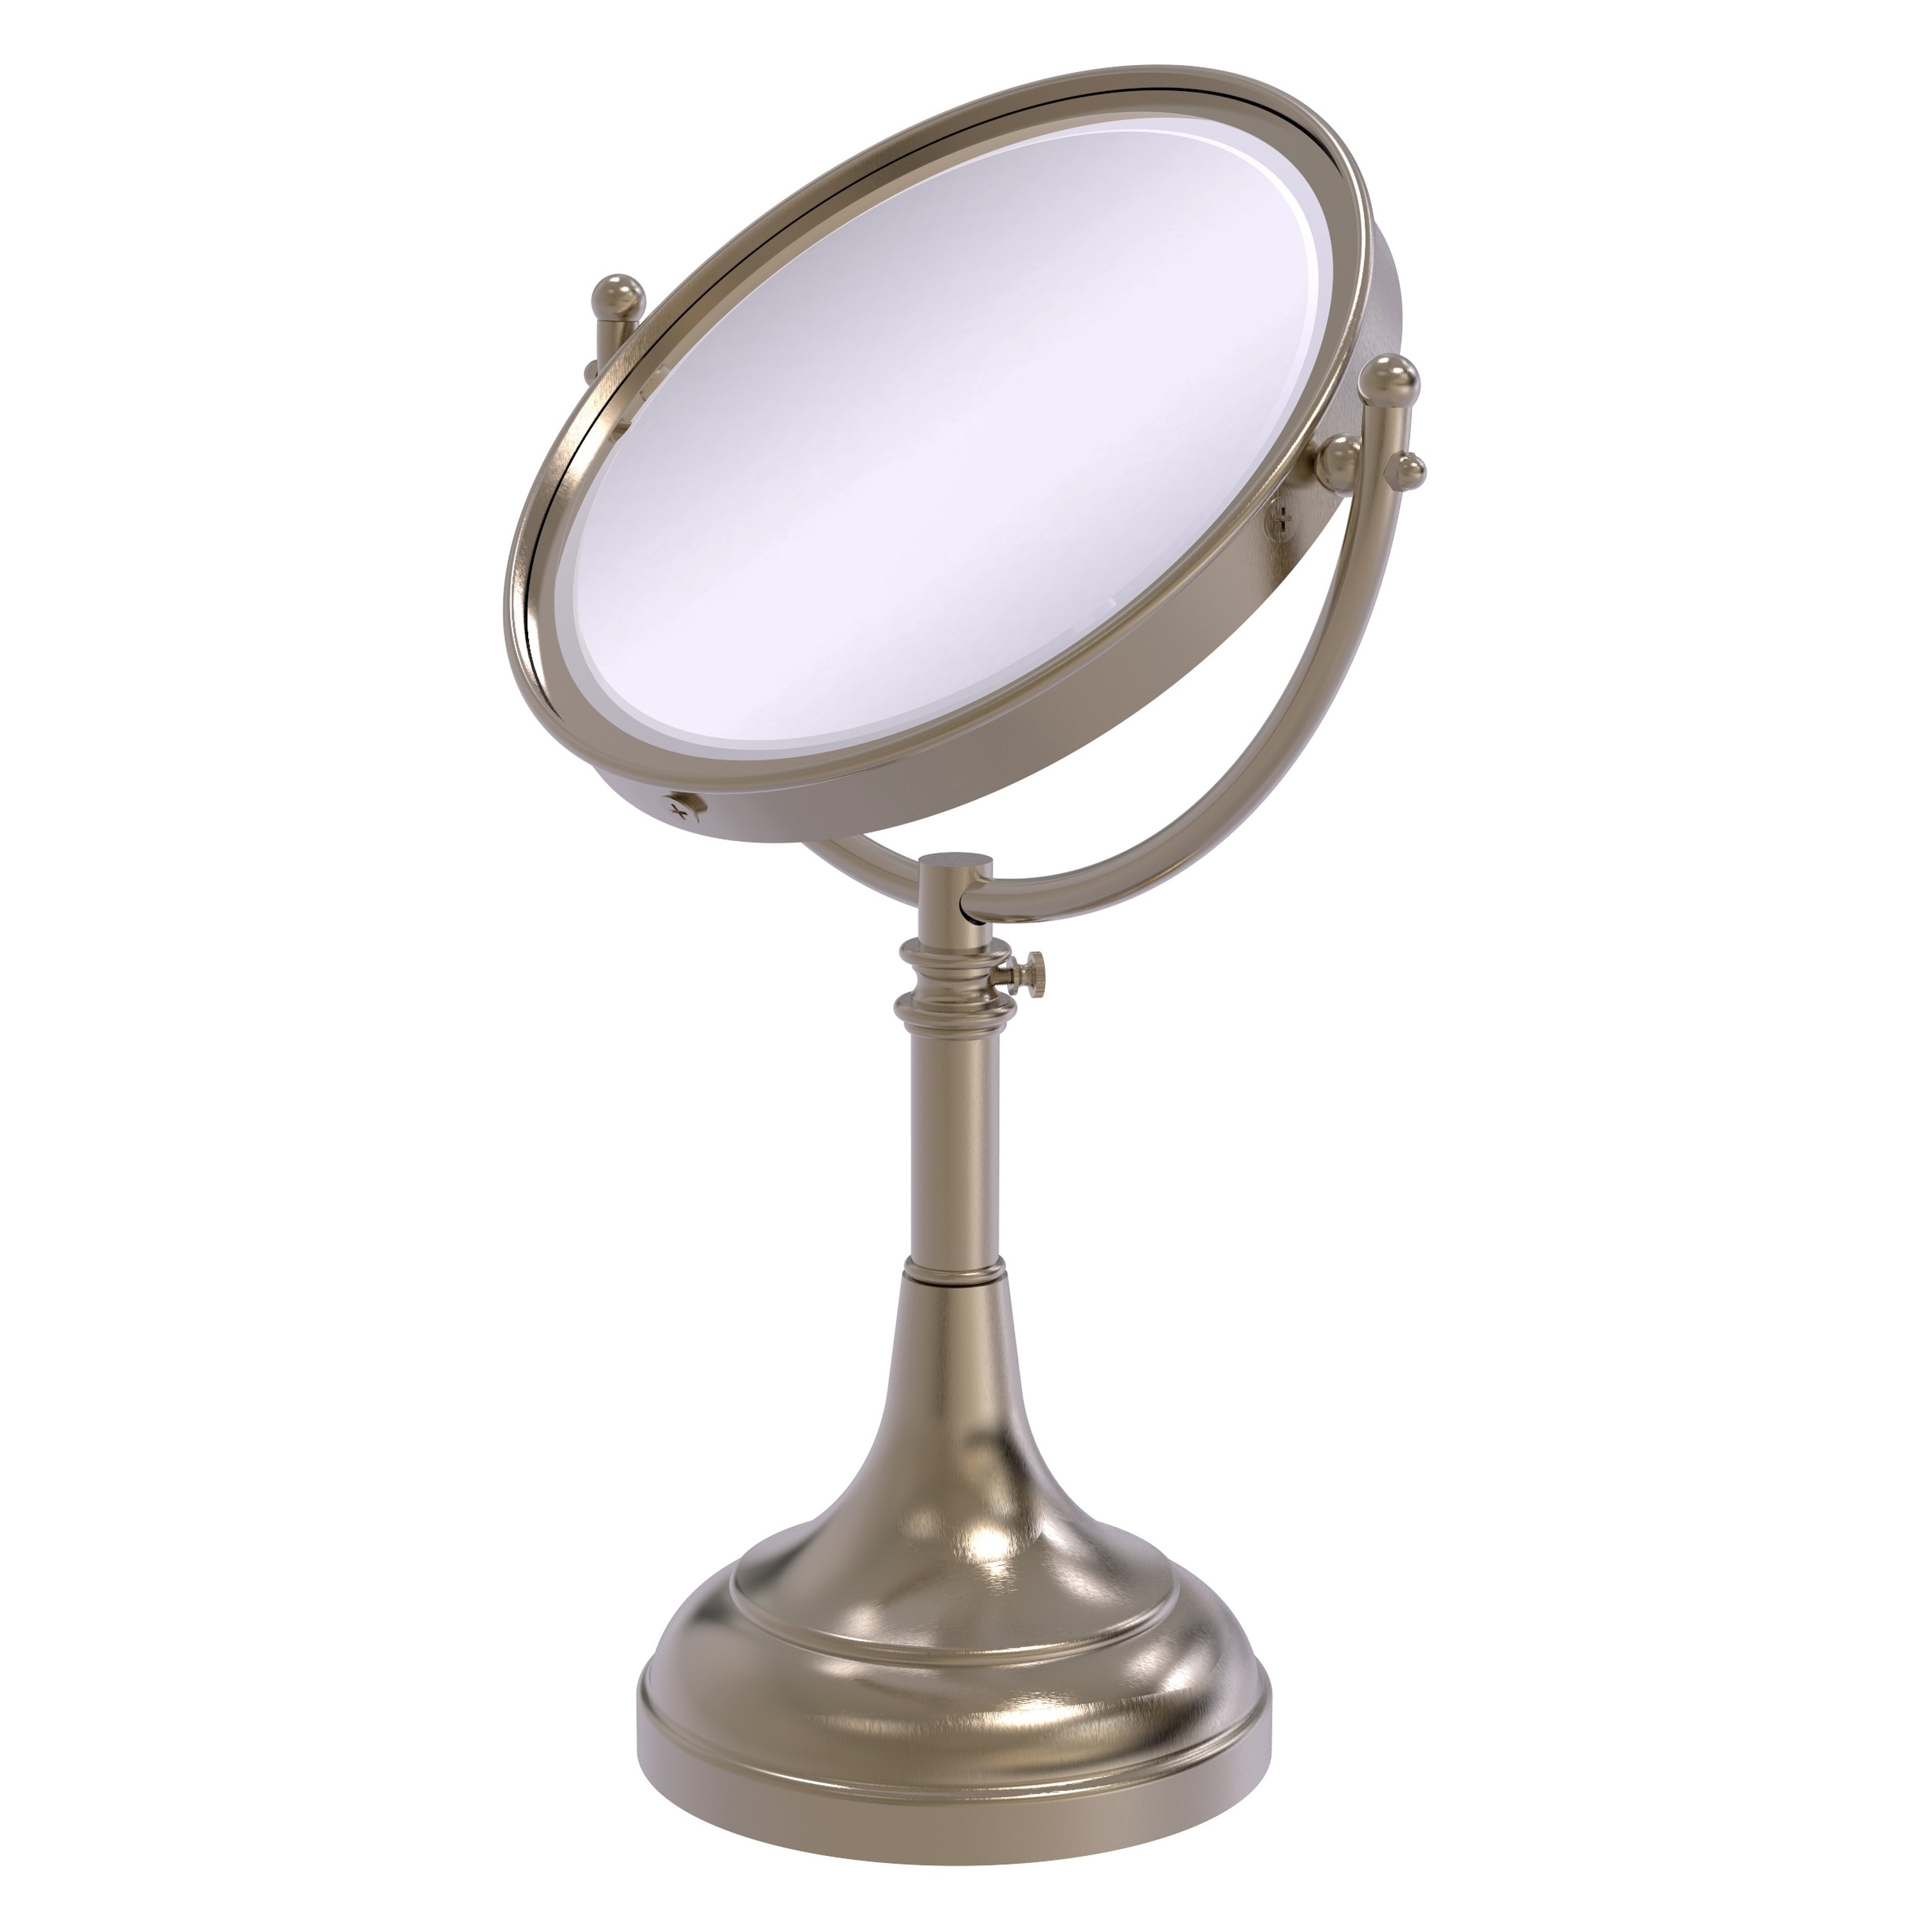 8-in x 23.5-in Antique Black Double-sided 2X Magnifying Countertop Vanity Mirror | - Allied Brass DM-1/2X-PEW